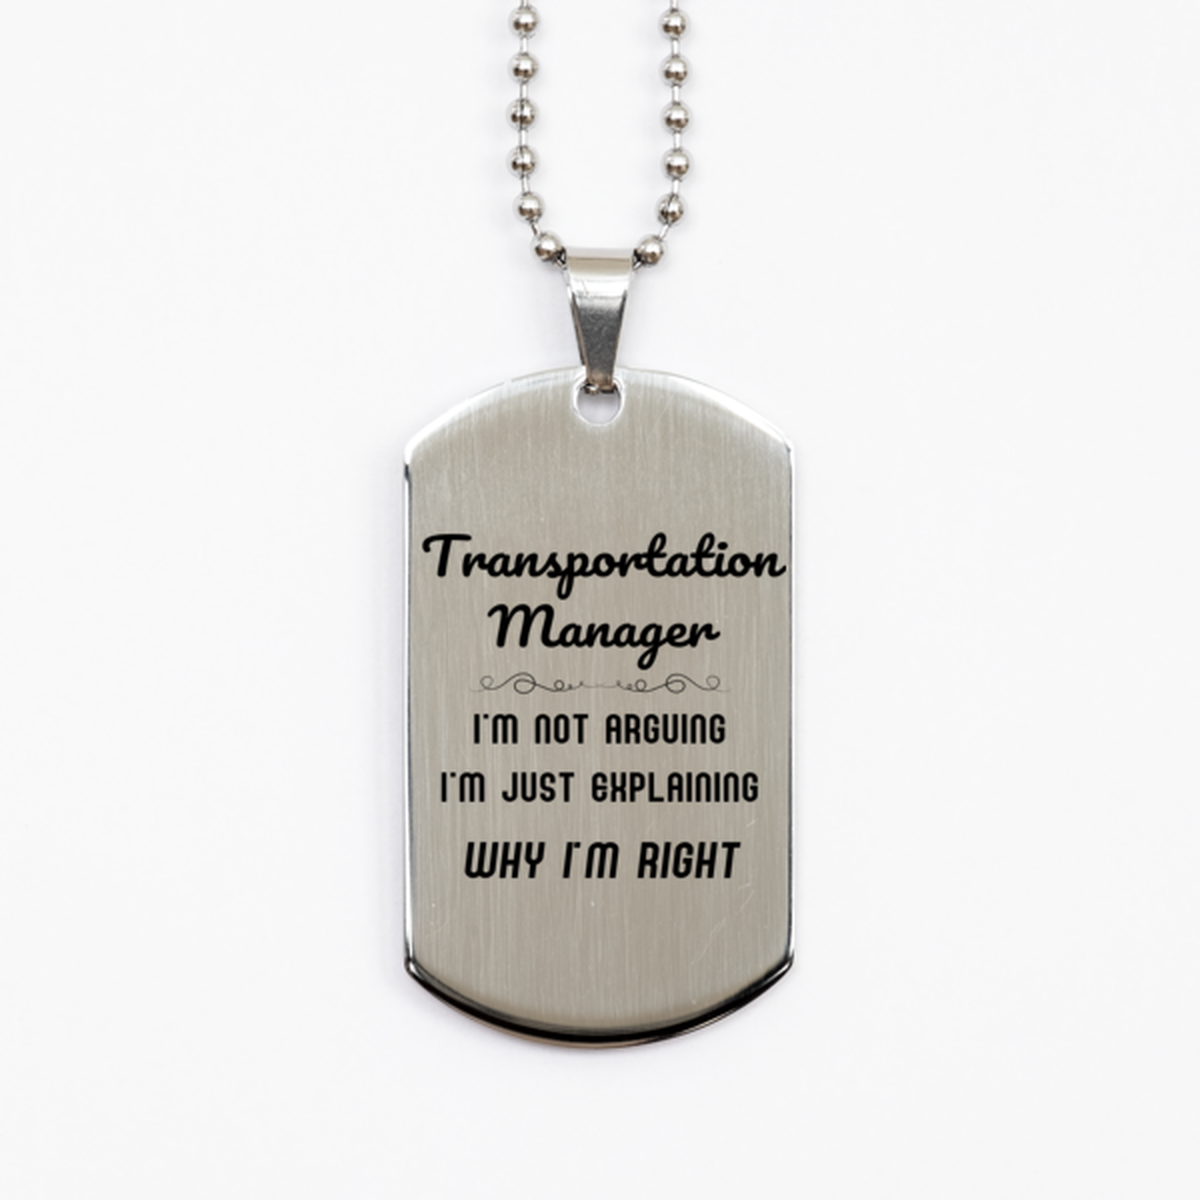 Transportation Manager I'm not Arguing. I'm Just Explaining Why I'm RIGHT Silver Dog Tag, Funny Saying Quote Transportation Manager Gifts For Transportation Manager Graduation Birthday Christmas Gifts for Men Women Coworker